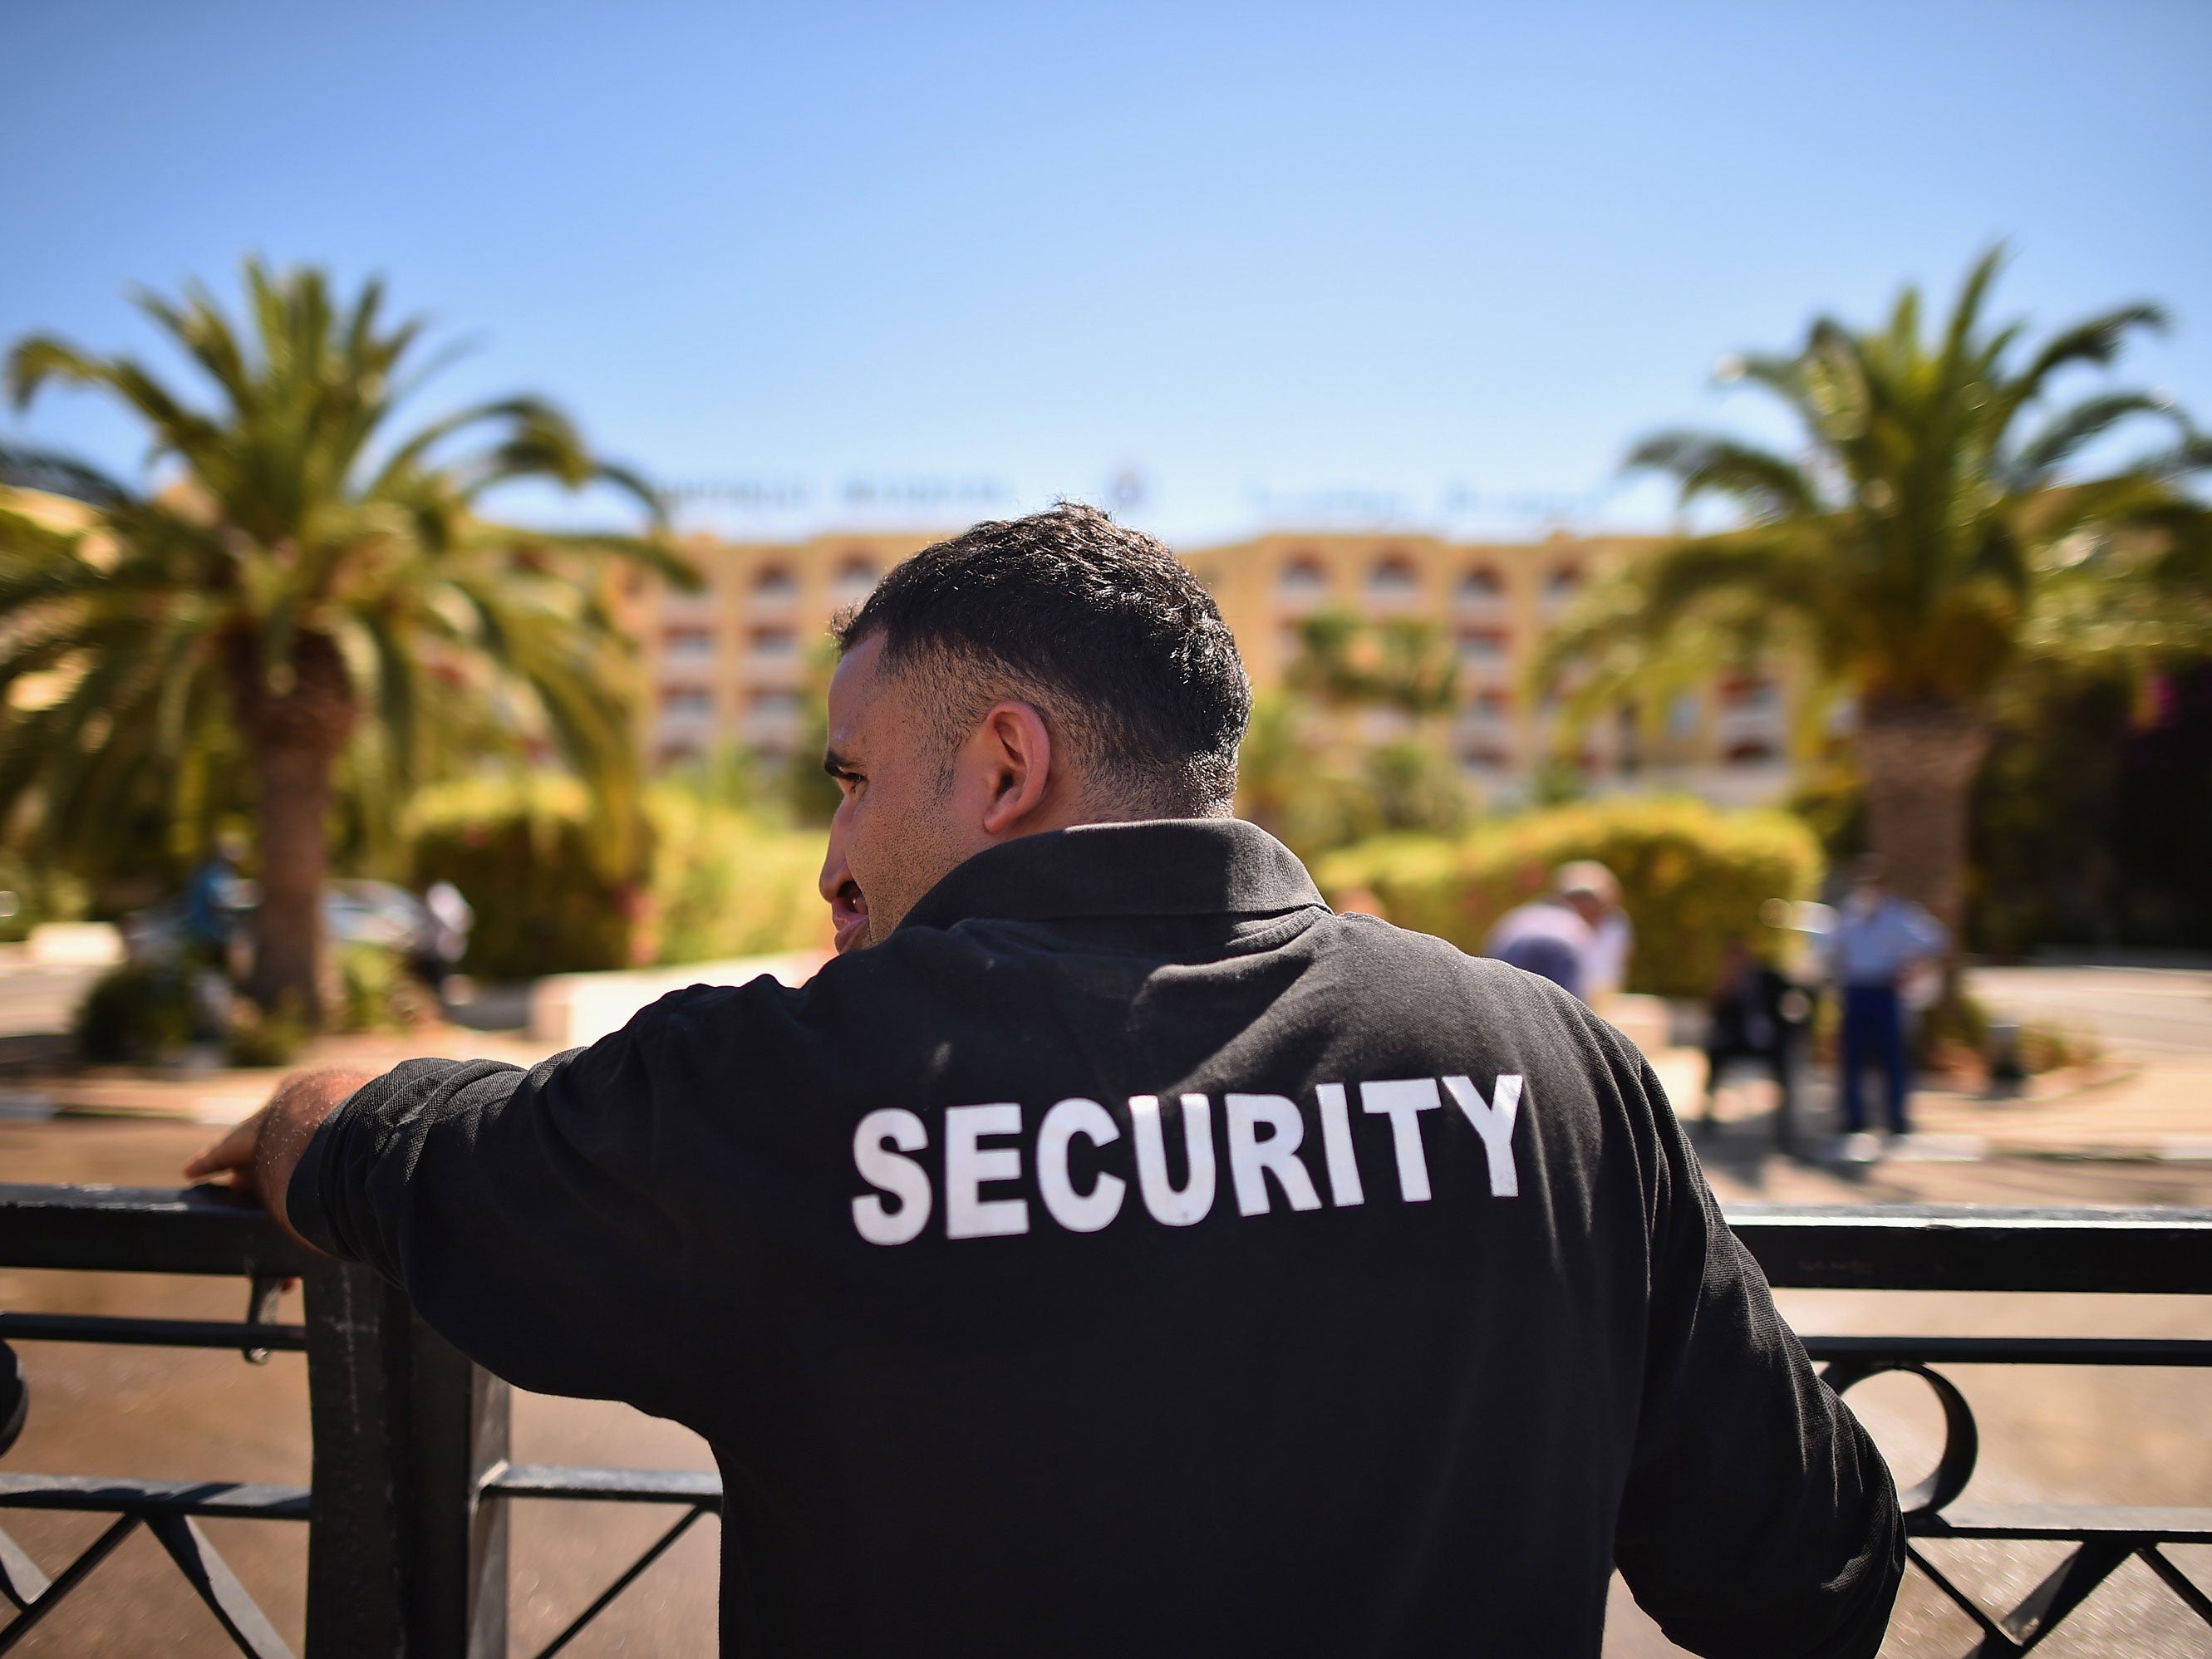 Security is being ramped up in Tunisia following the country's worst terror attack